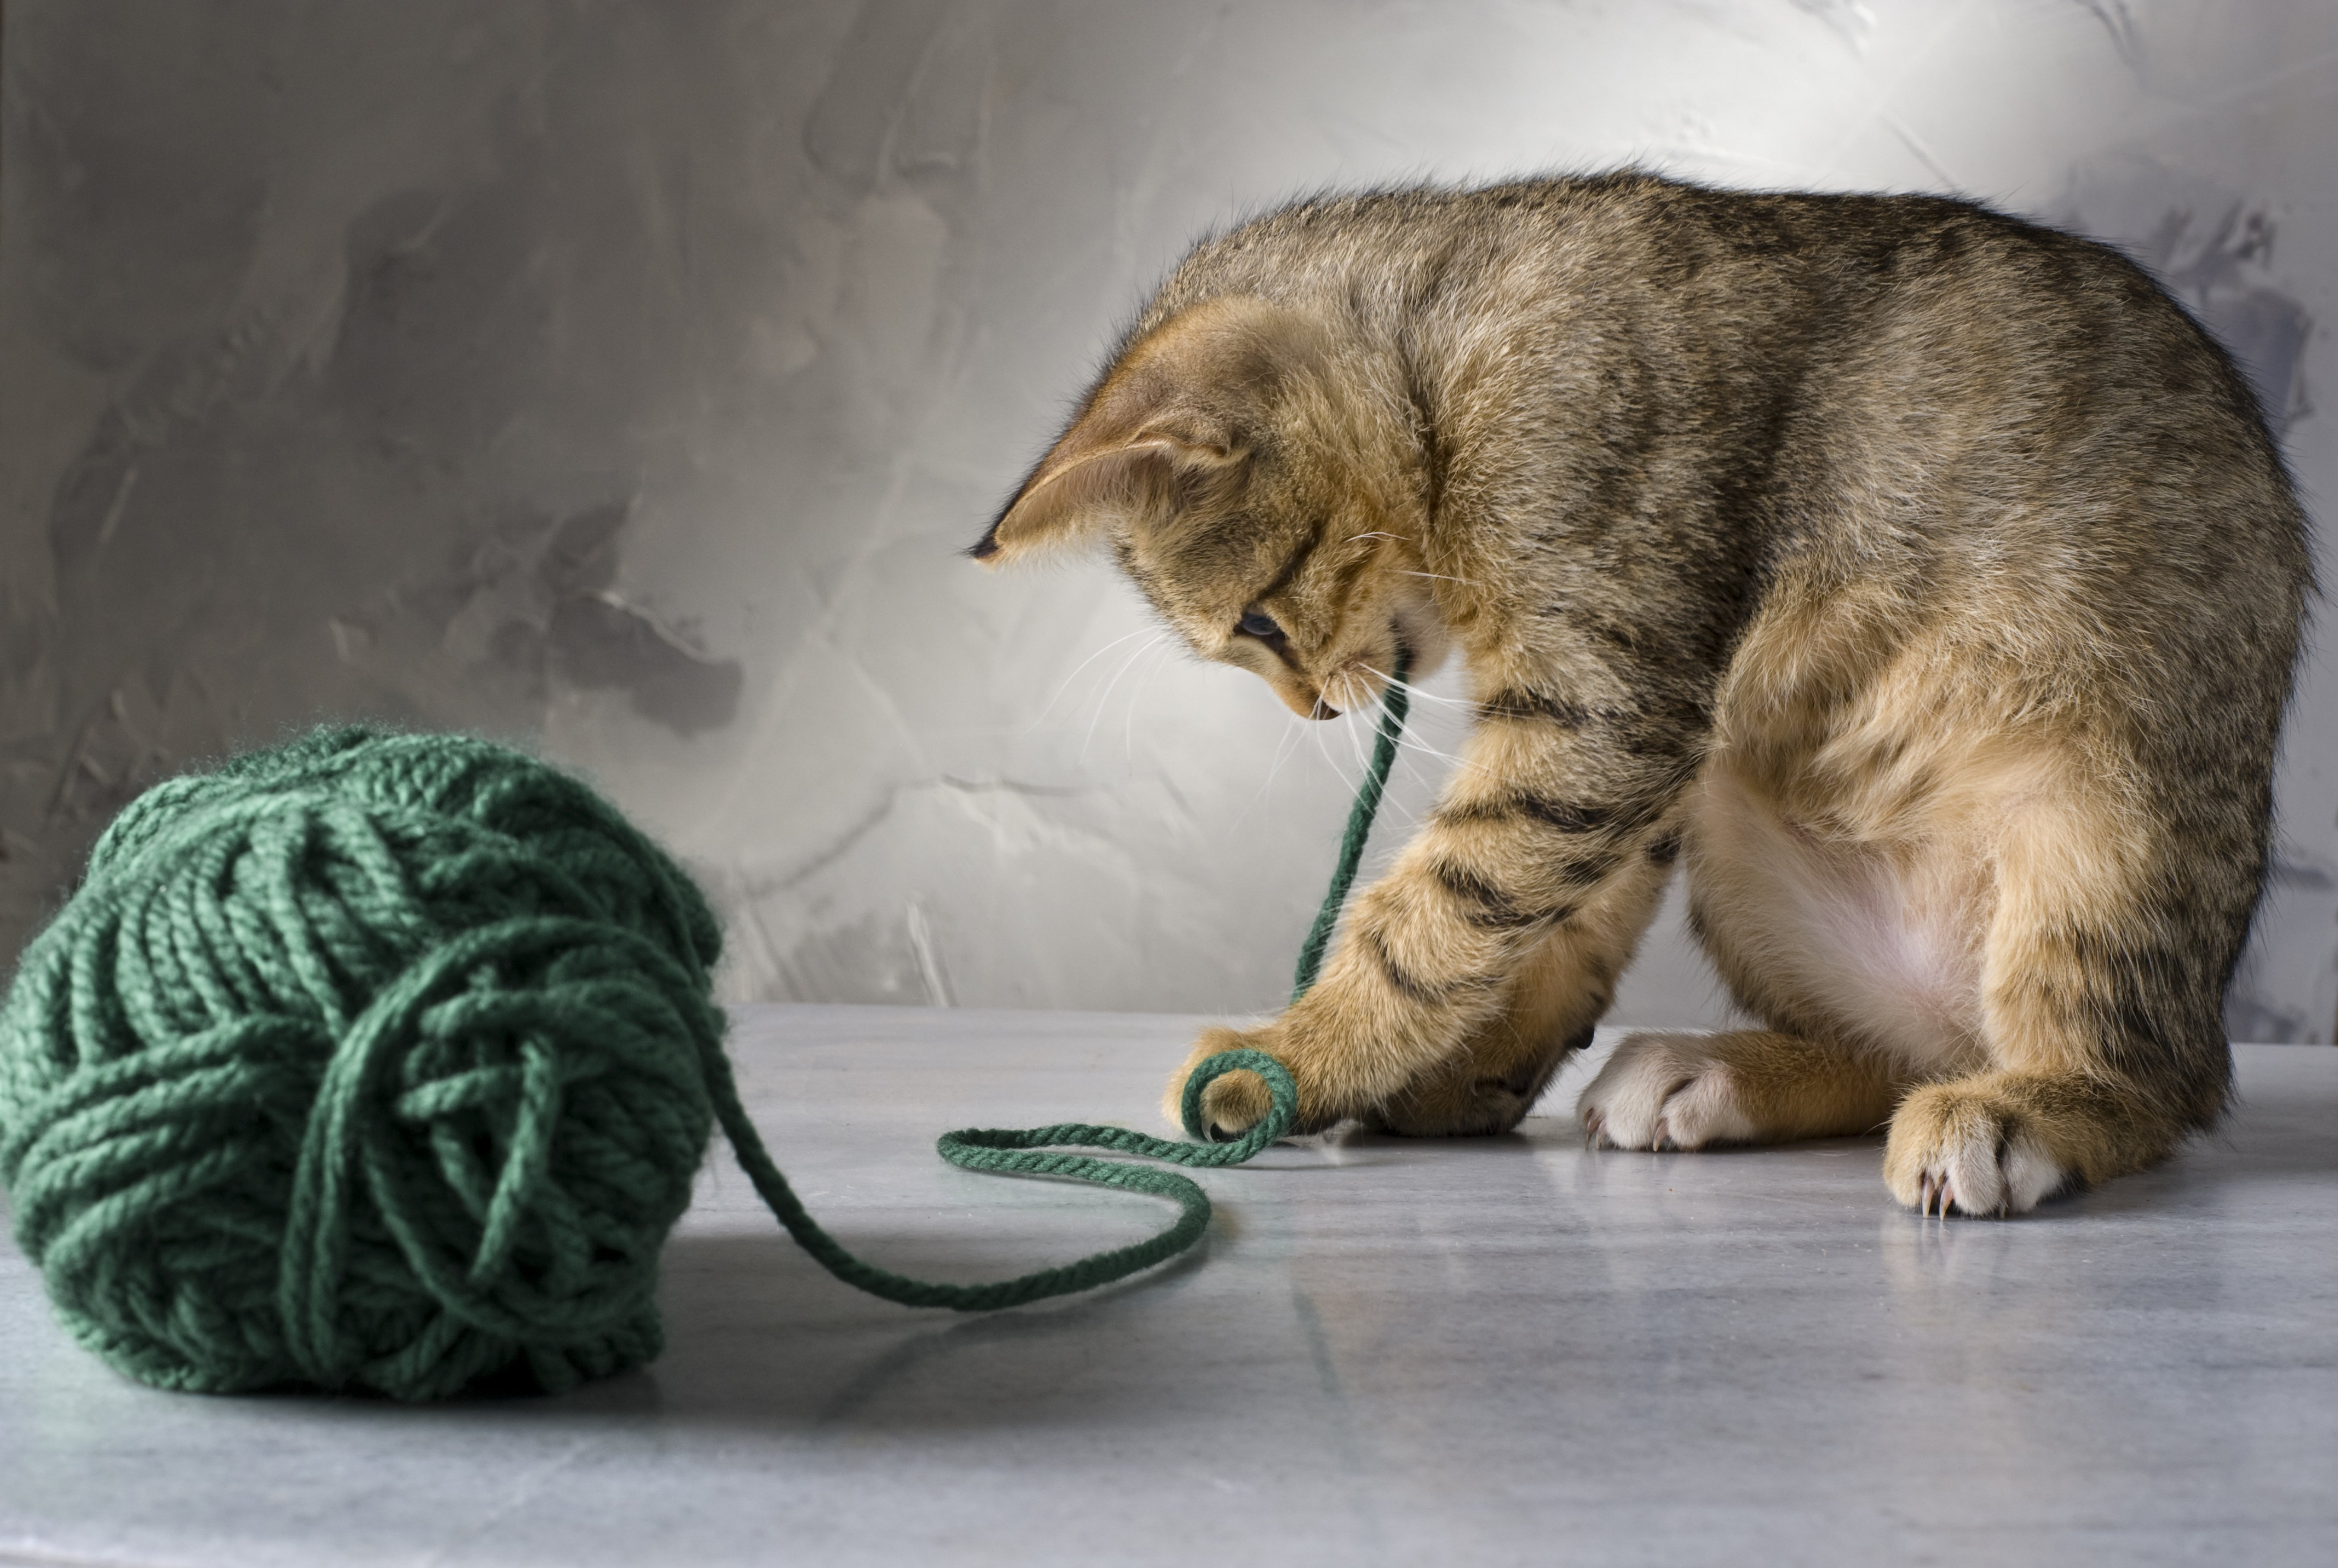 ball, Cat, Cute, Green, Photo, Playing, Sewing, Striped Wallpaper